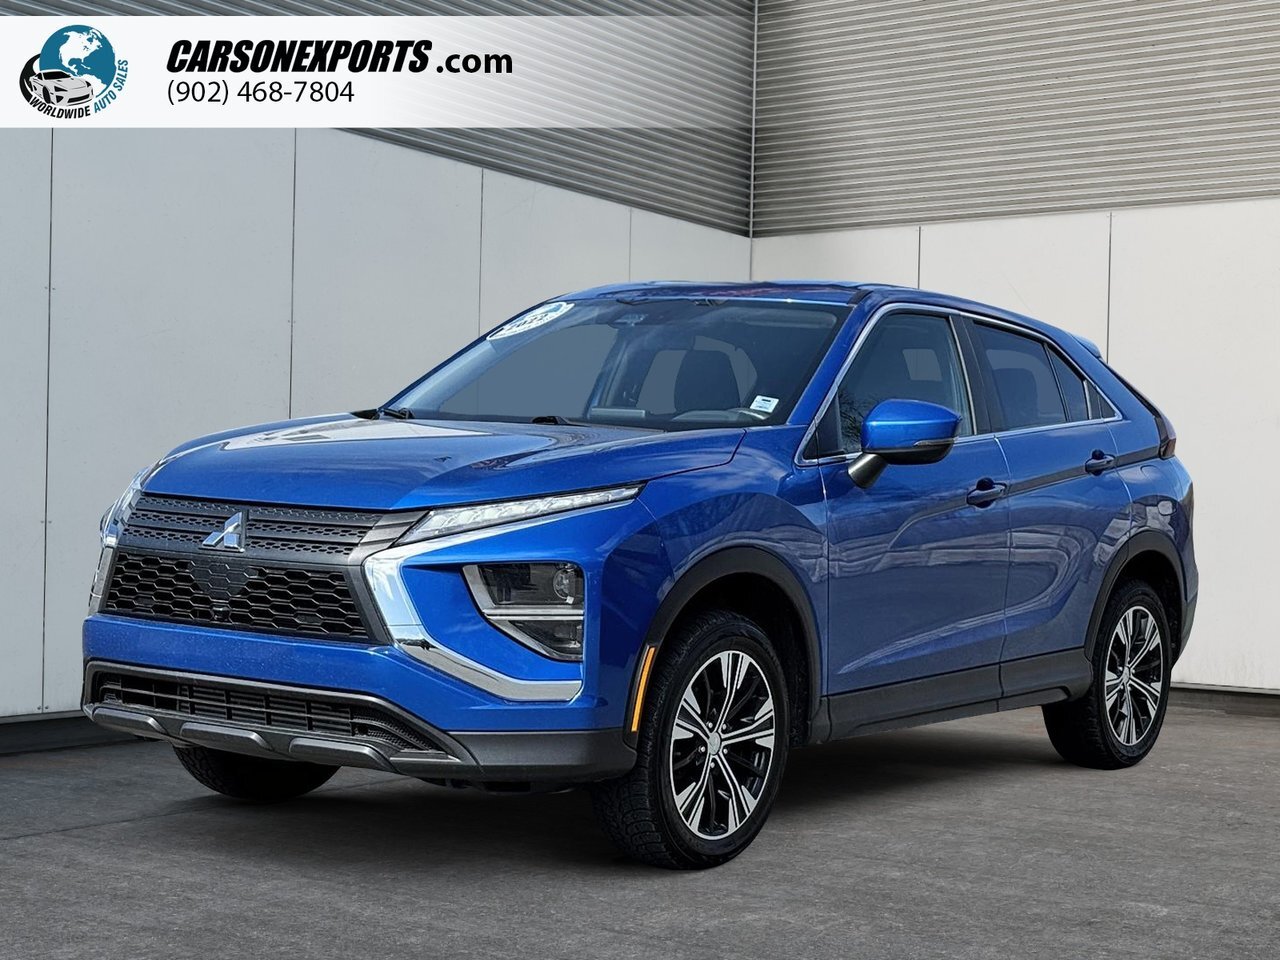 2022 Mitsubishi Eclipse Cross ES The best place to buy a used car. Period.